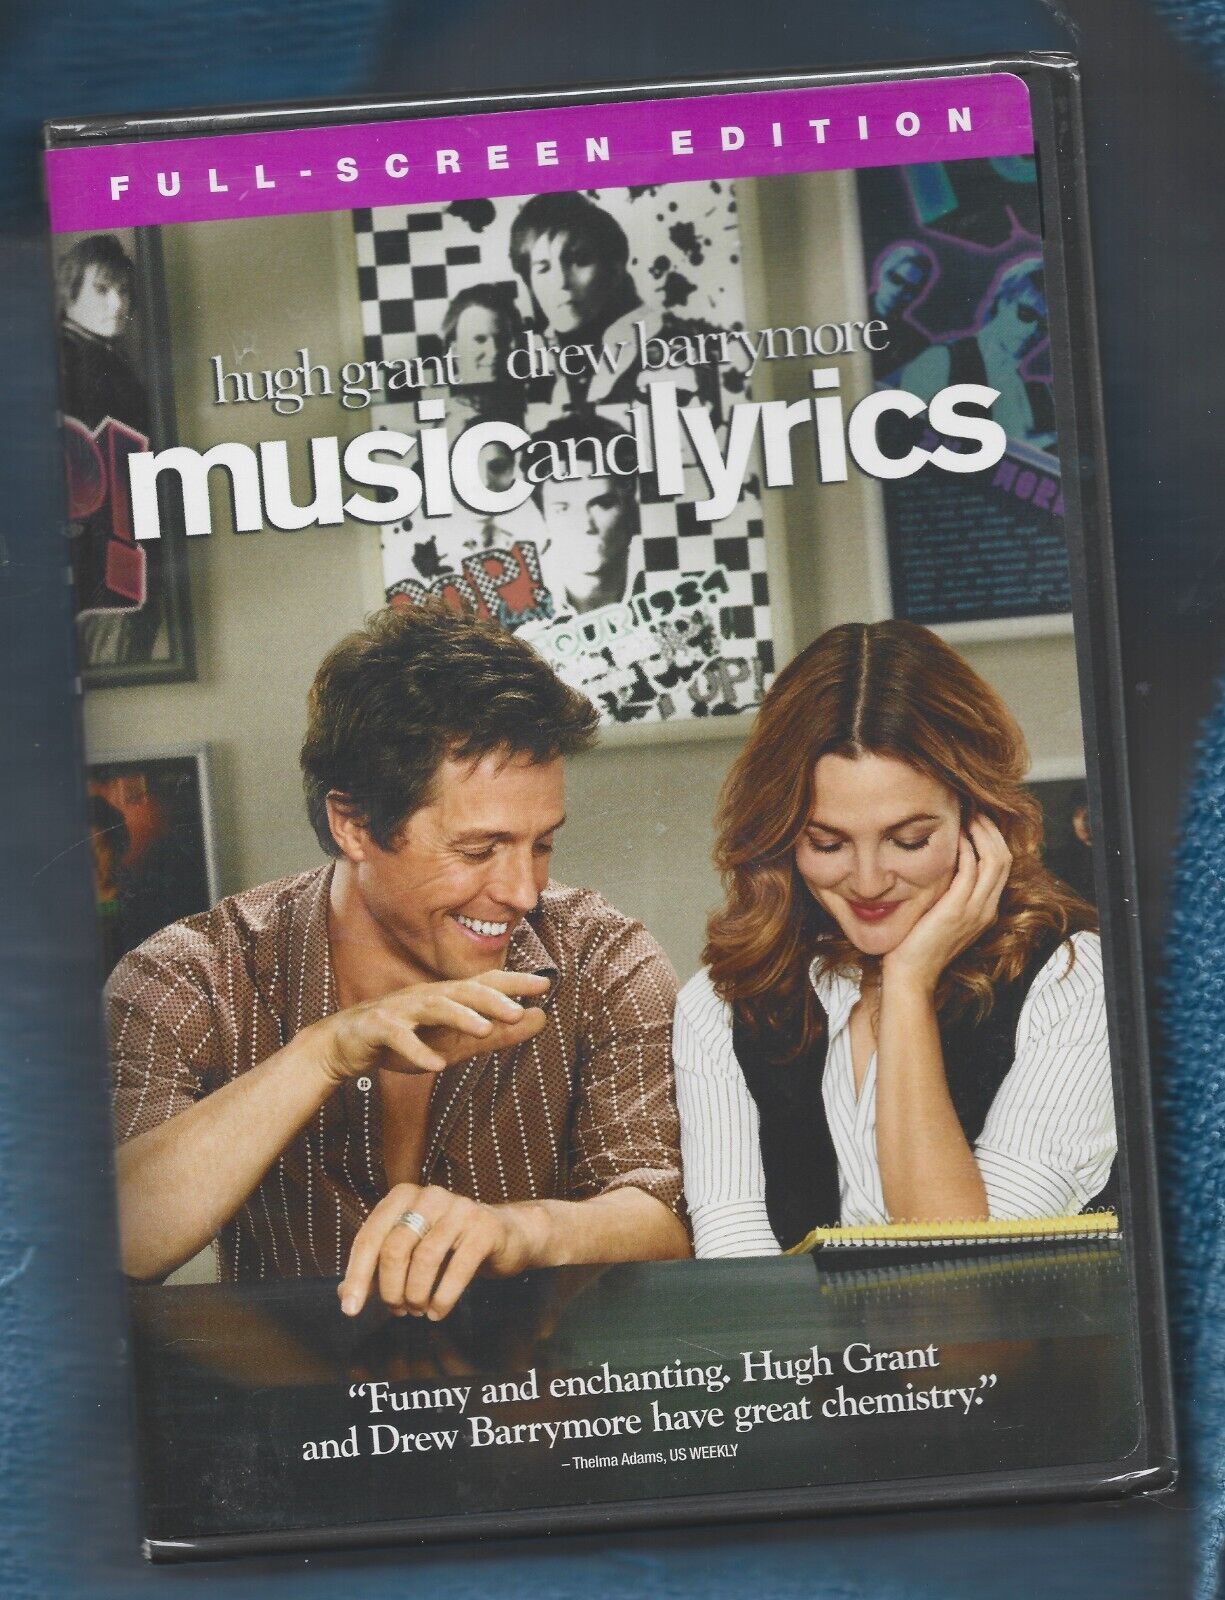 Primary image for Sealed Music and Lyrics DVD-Full-Screen Edition-Hugh Grant, Drew Barrymore